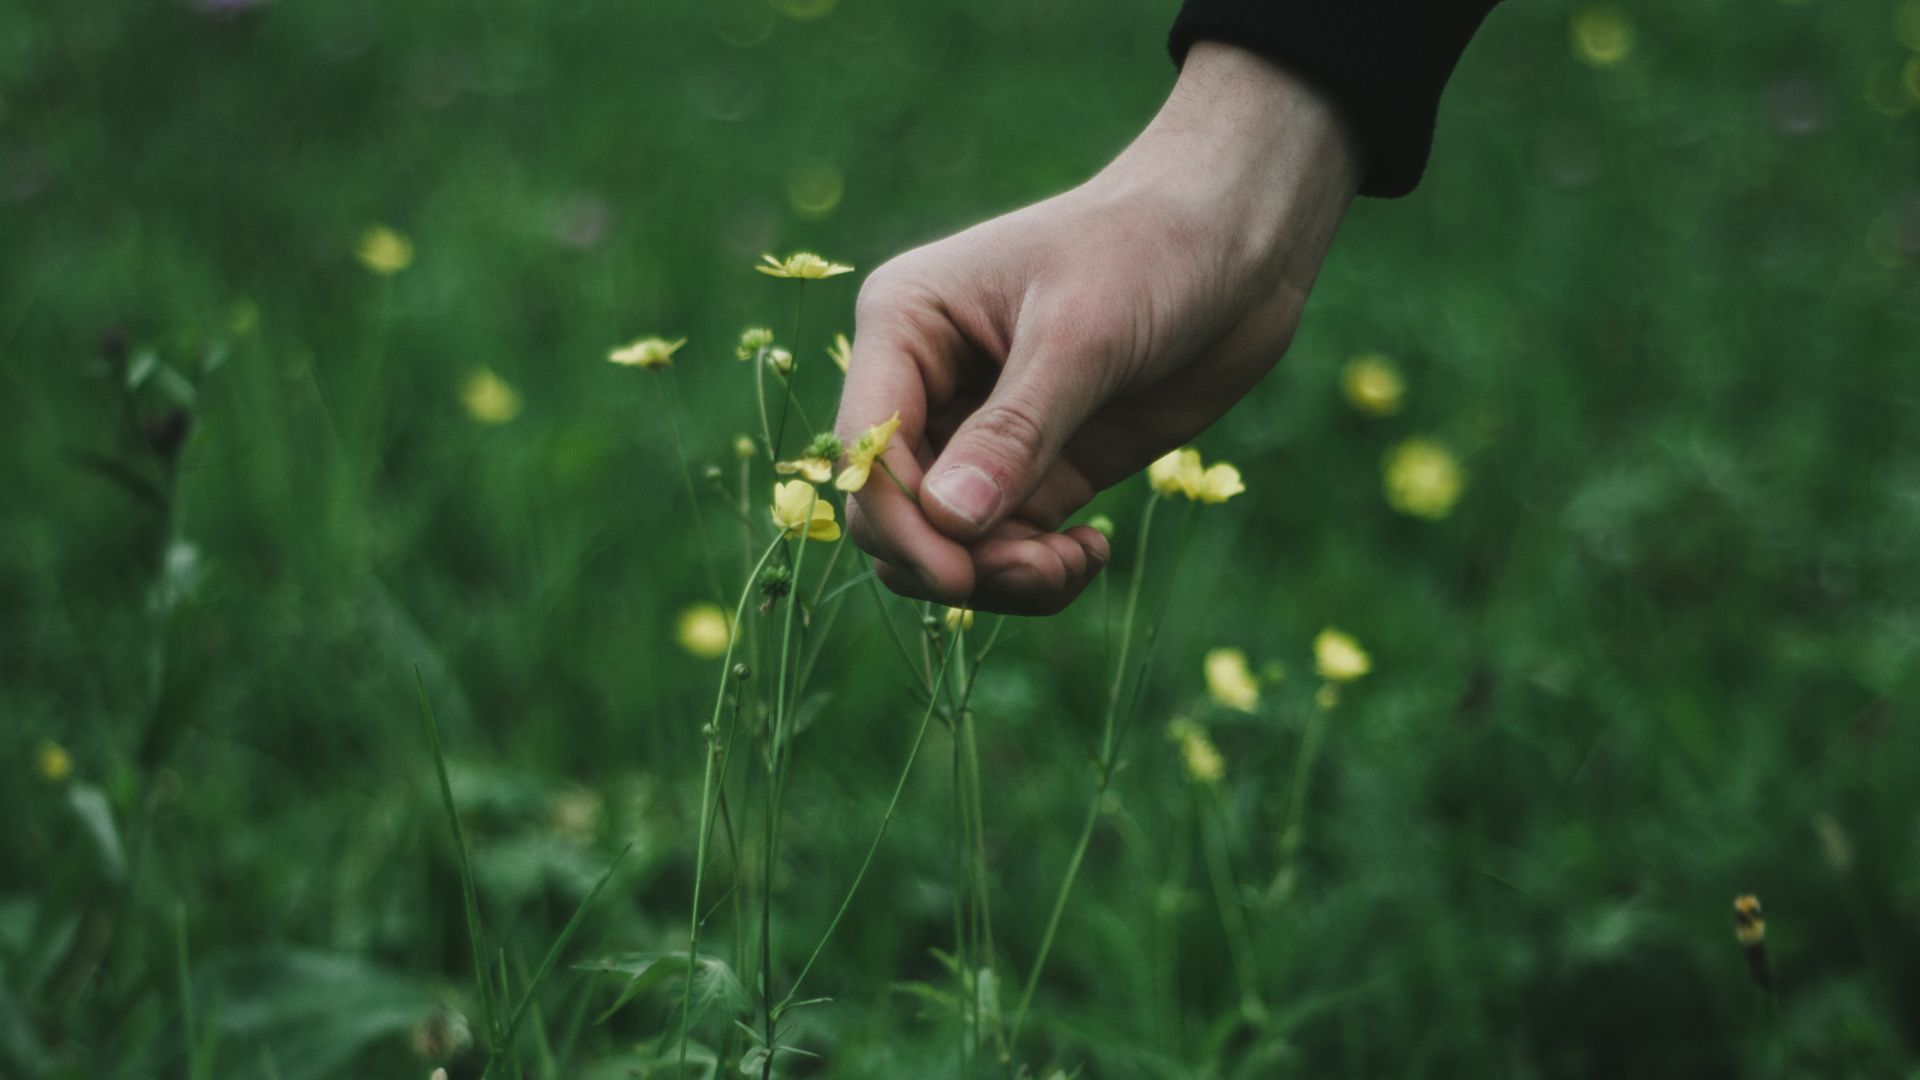 Person Holding Yellow Flower During Daytime. Wallpaper in 1920x1080 Resolution